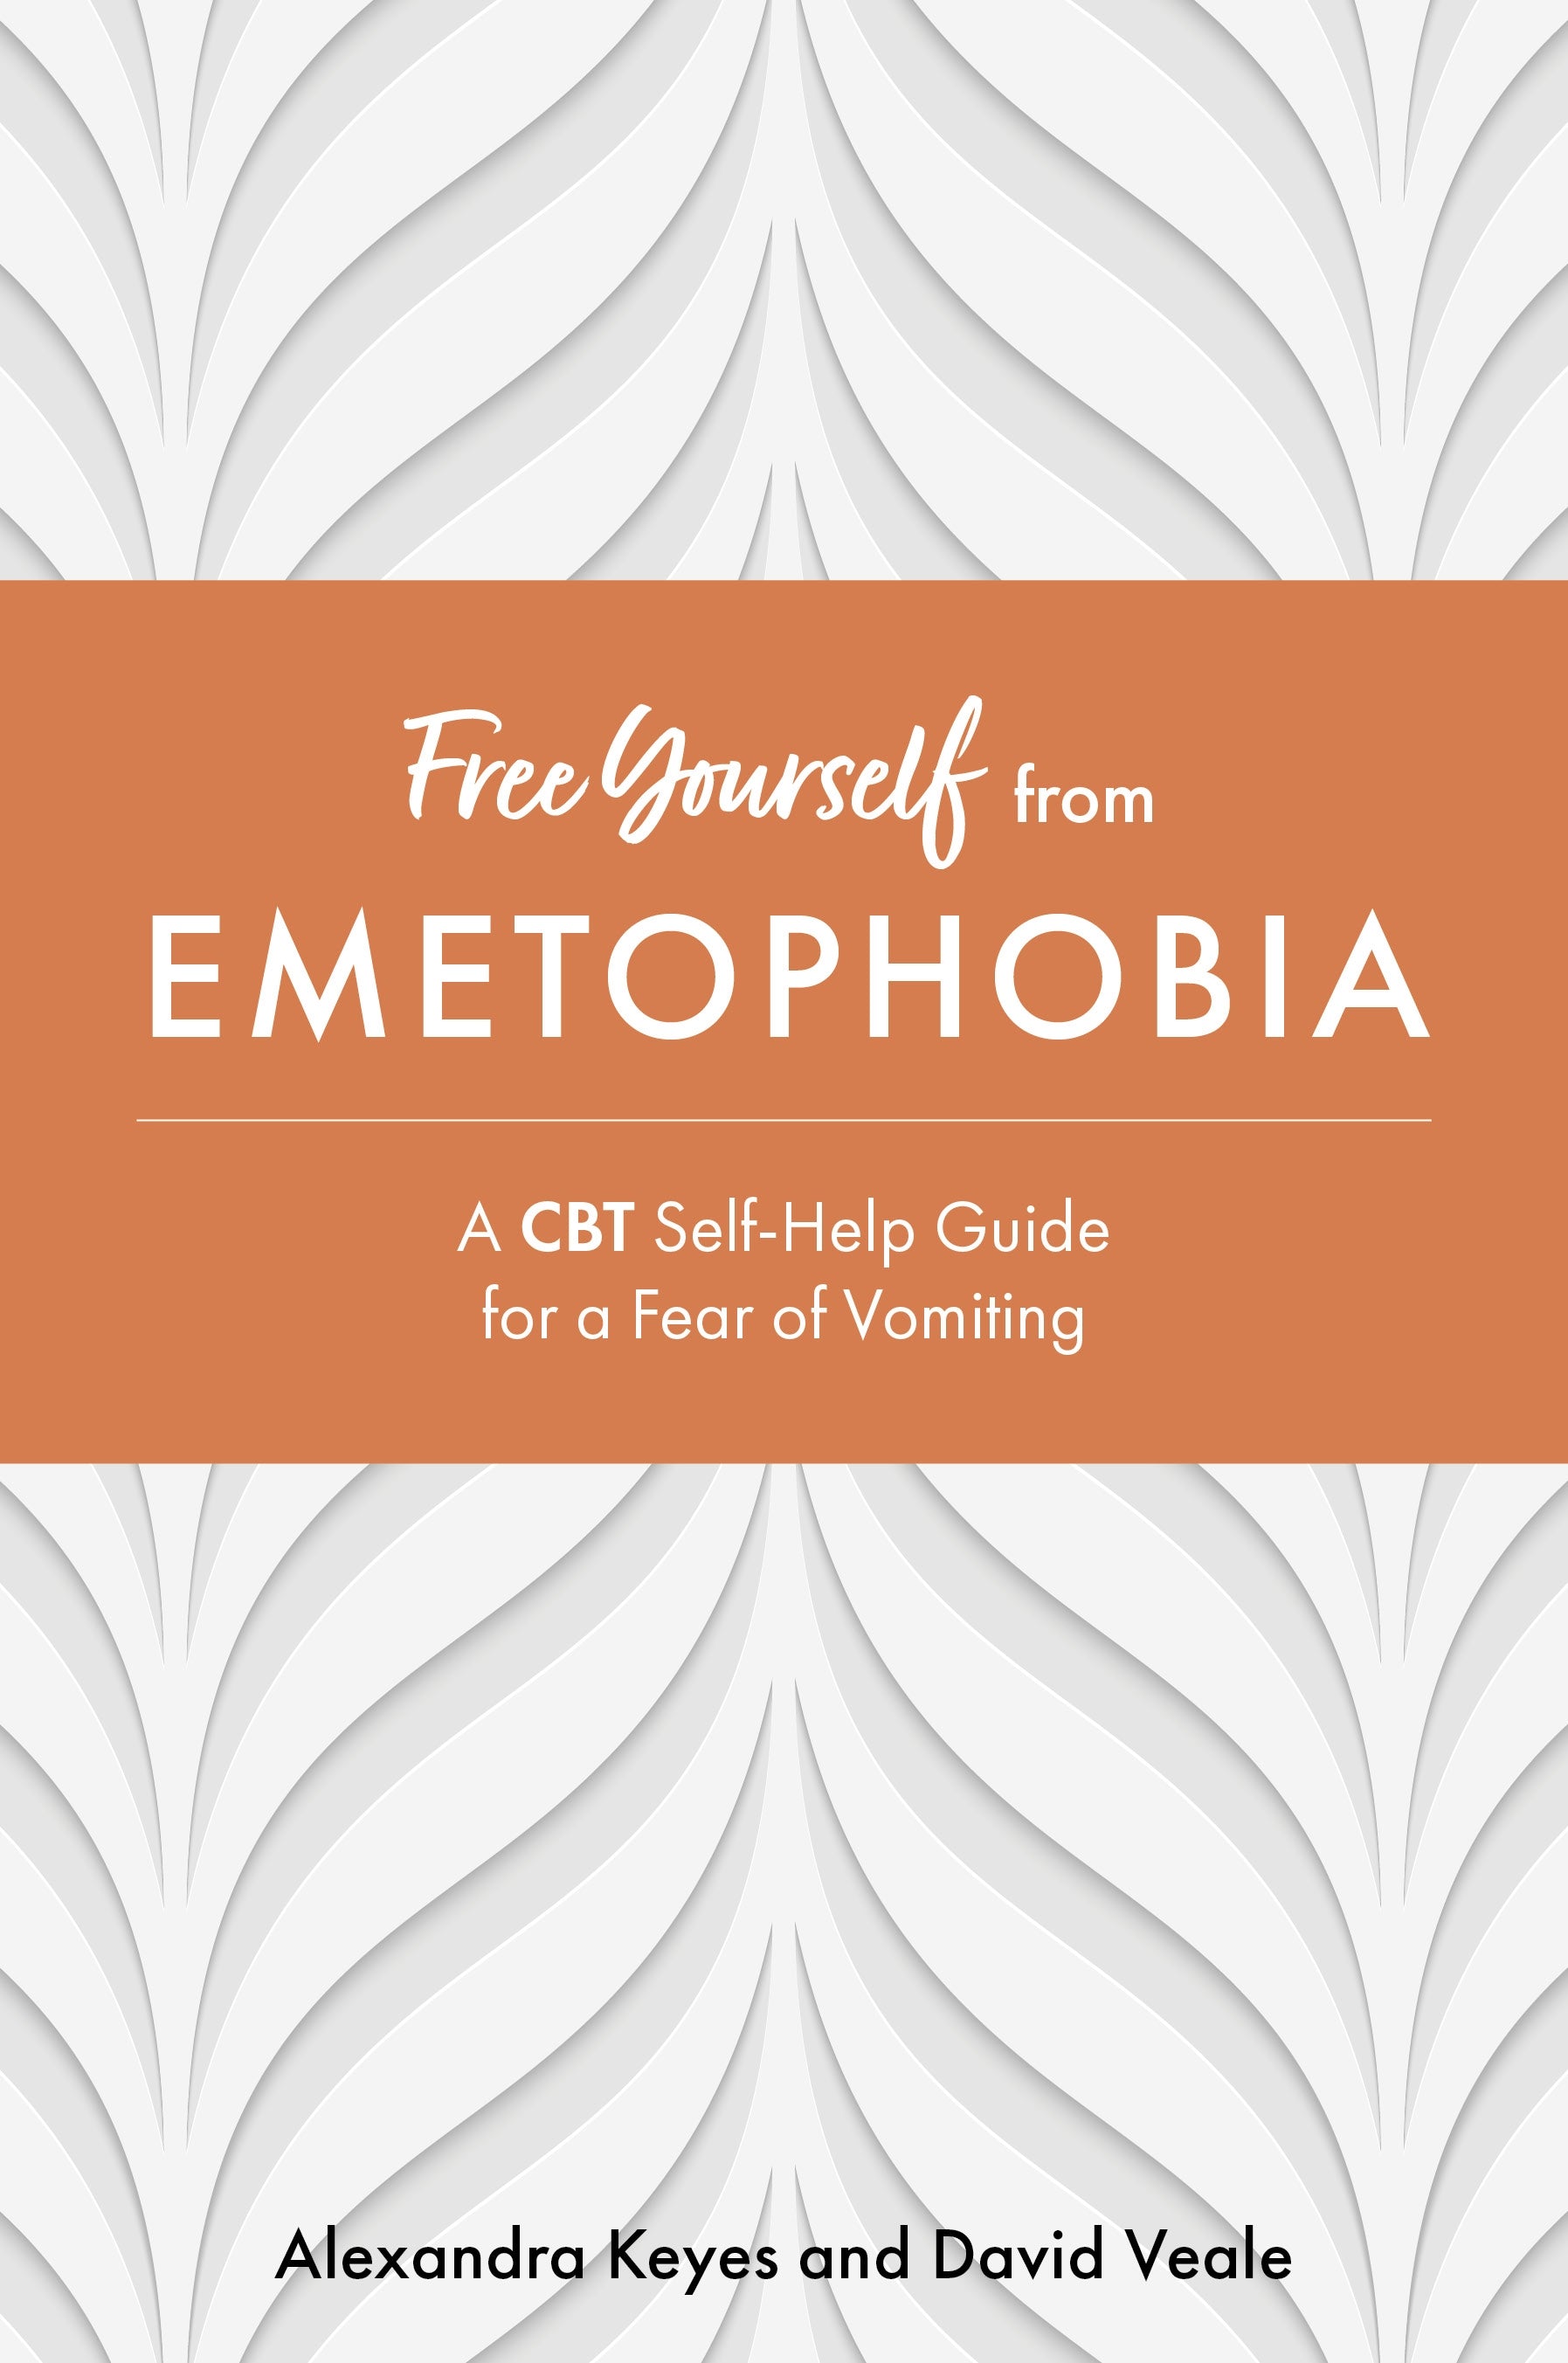 Free Yourself from Emetophobia by Alexandra Keyes, David Veale